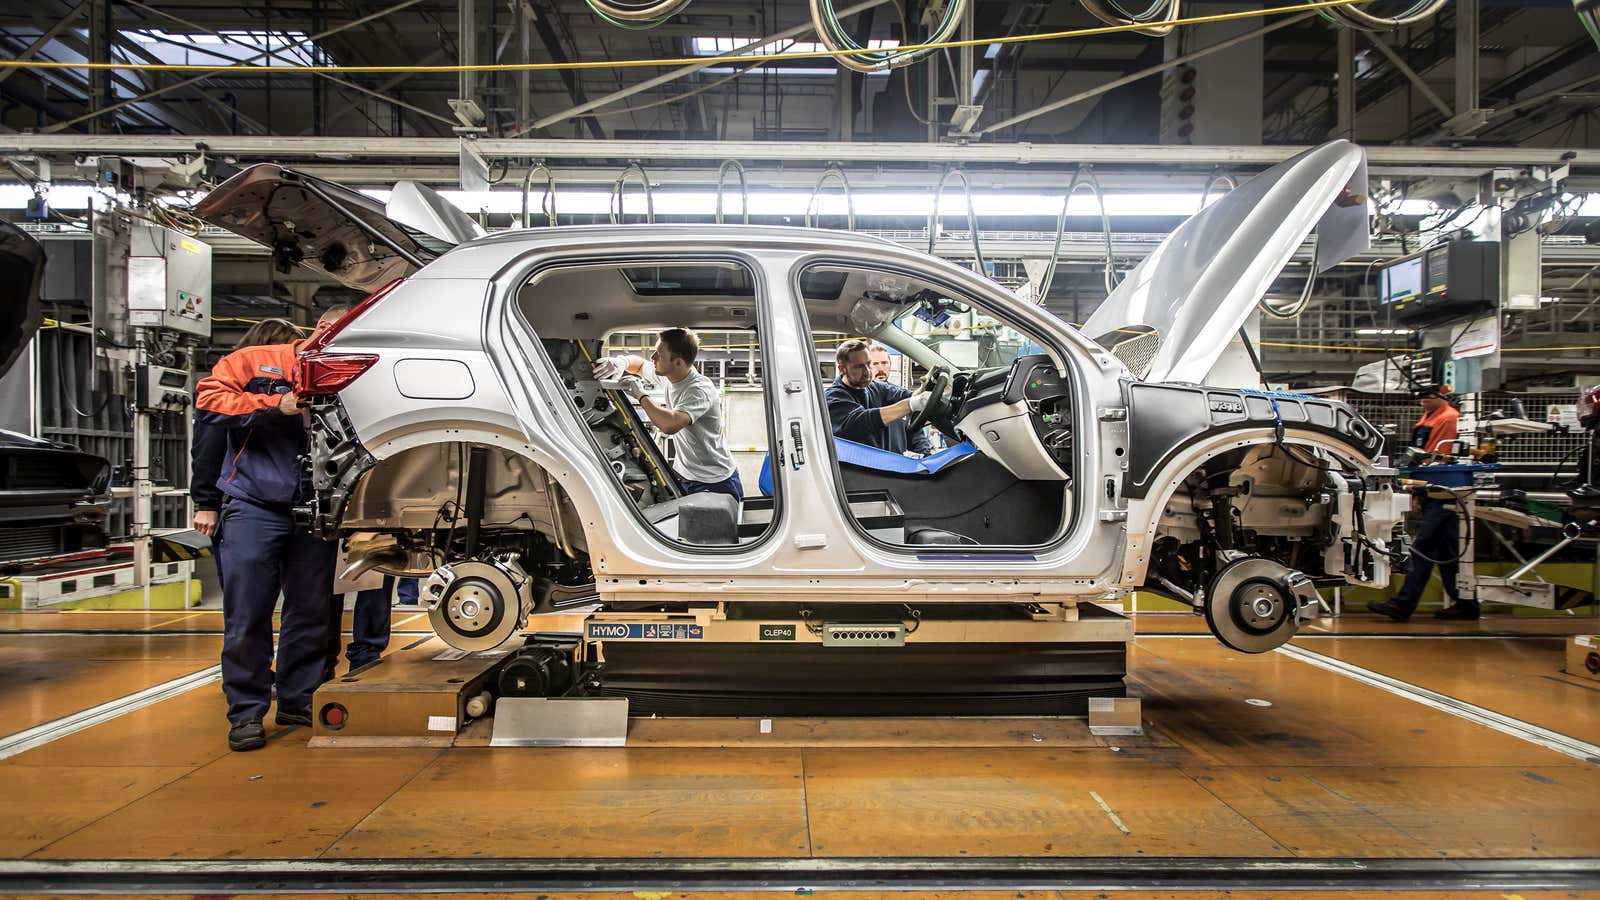 Steel accounts for one-third of the manufacturing carbon footprint of a Volvo car, and 7% of global carbon emissions. Green hydrogen could help bring that down.